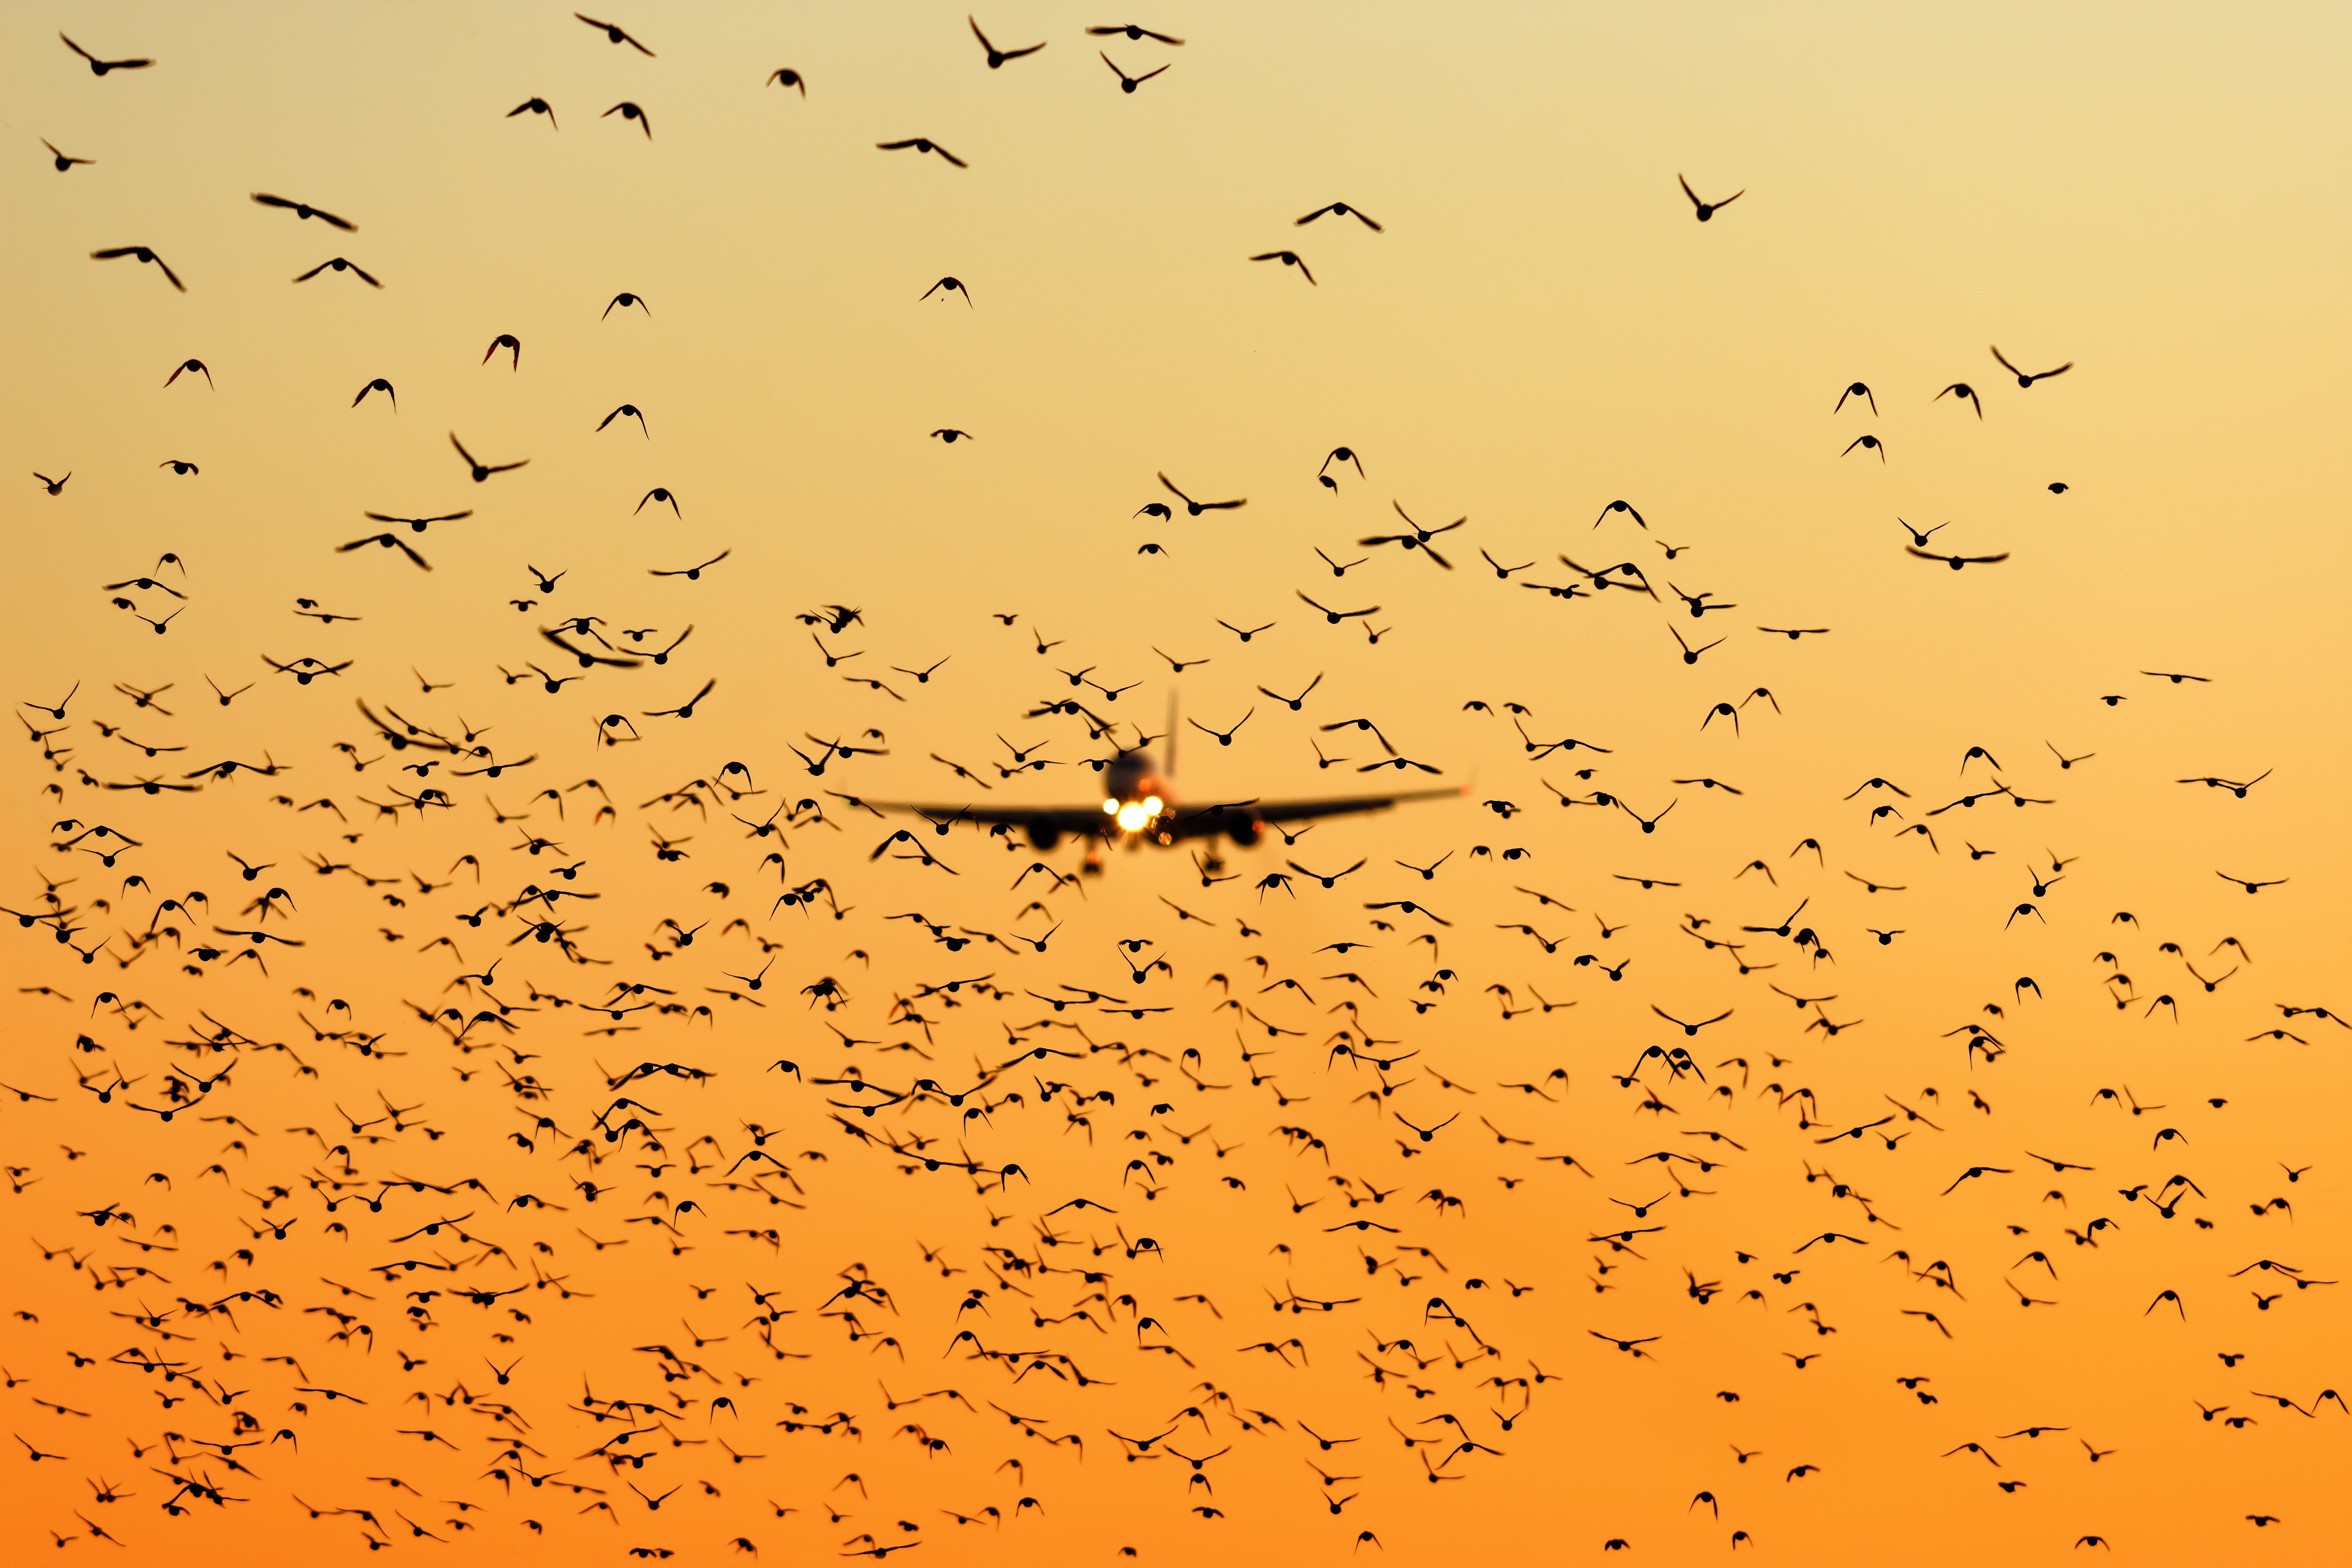 modern passenger jet engine aircraft landing to airport runway at dusk on background with huge flock of birds